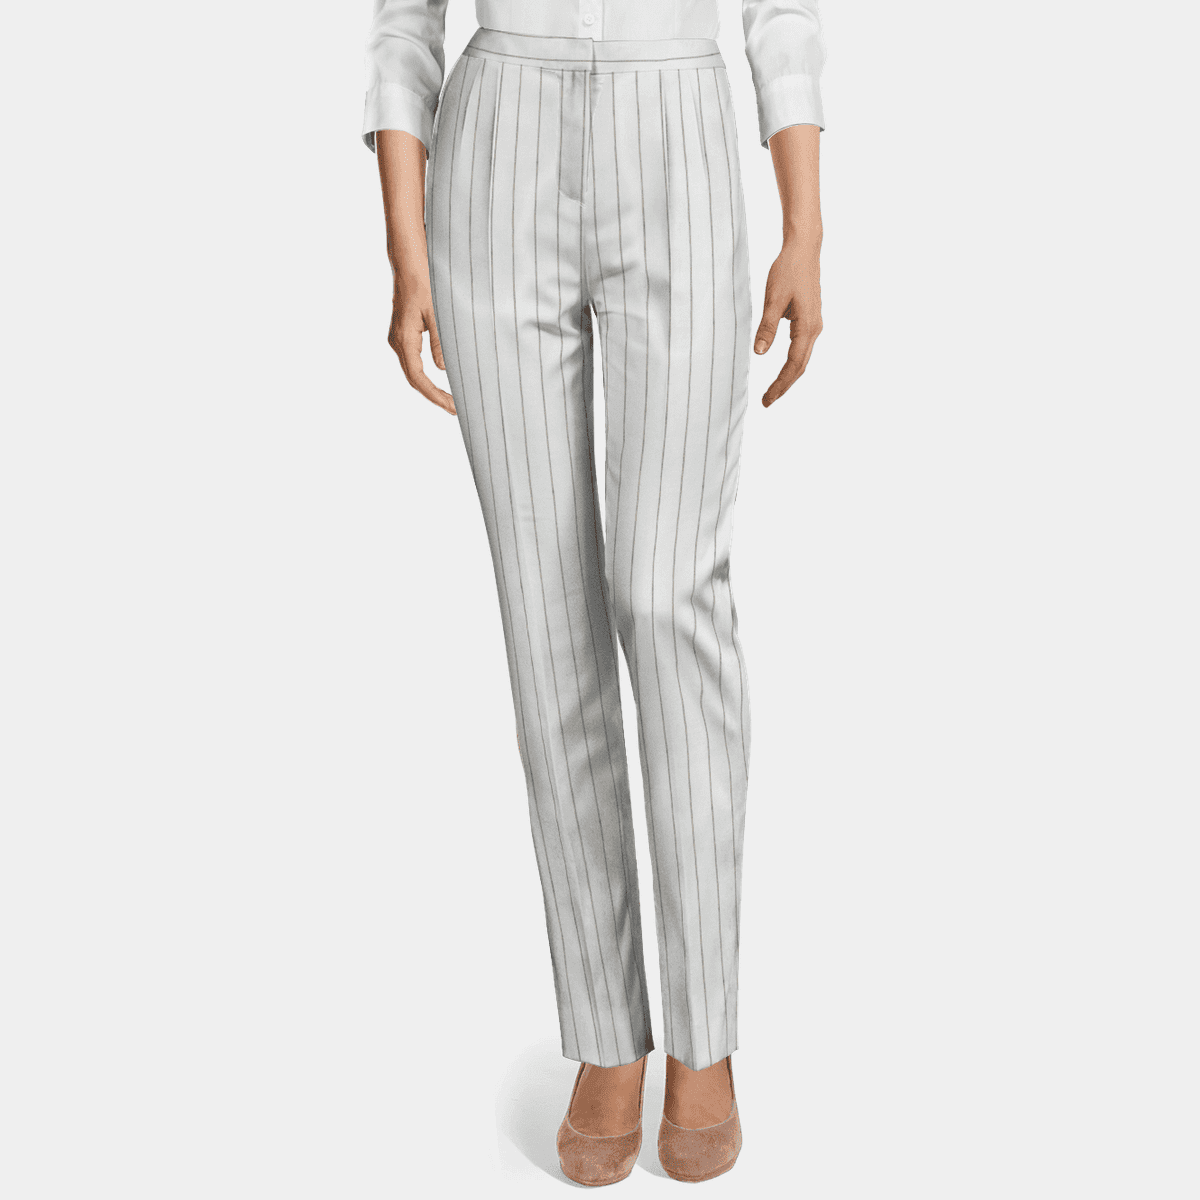 All white striped linen high waisted pleated lightweight Dress Pants